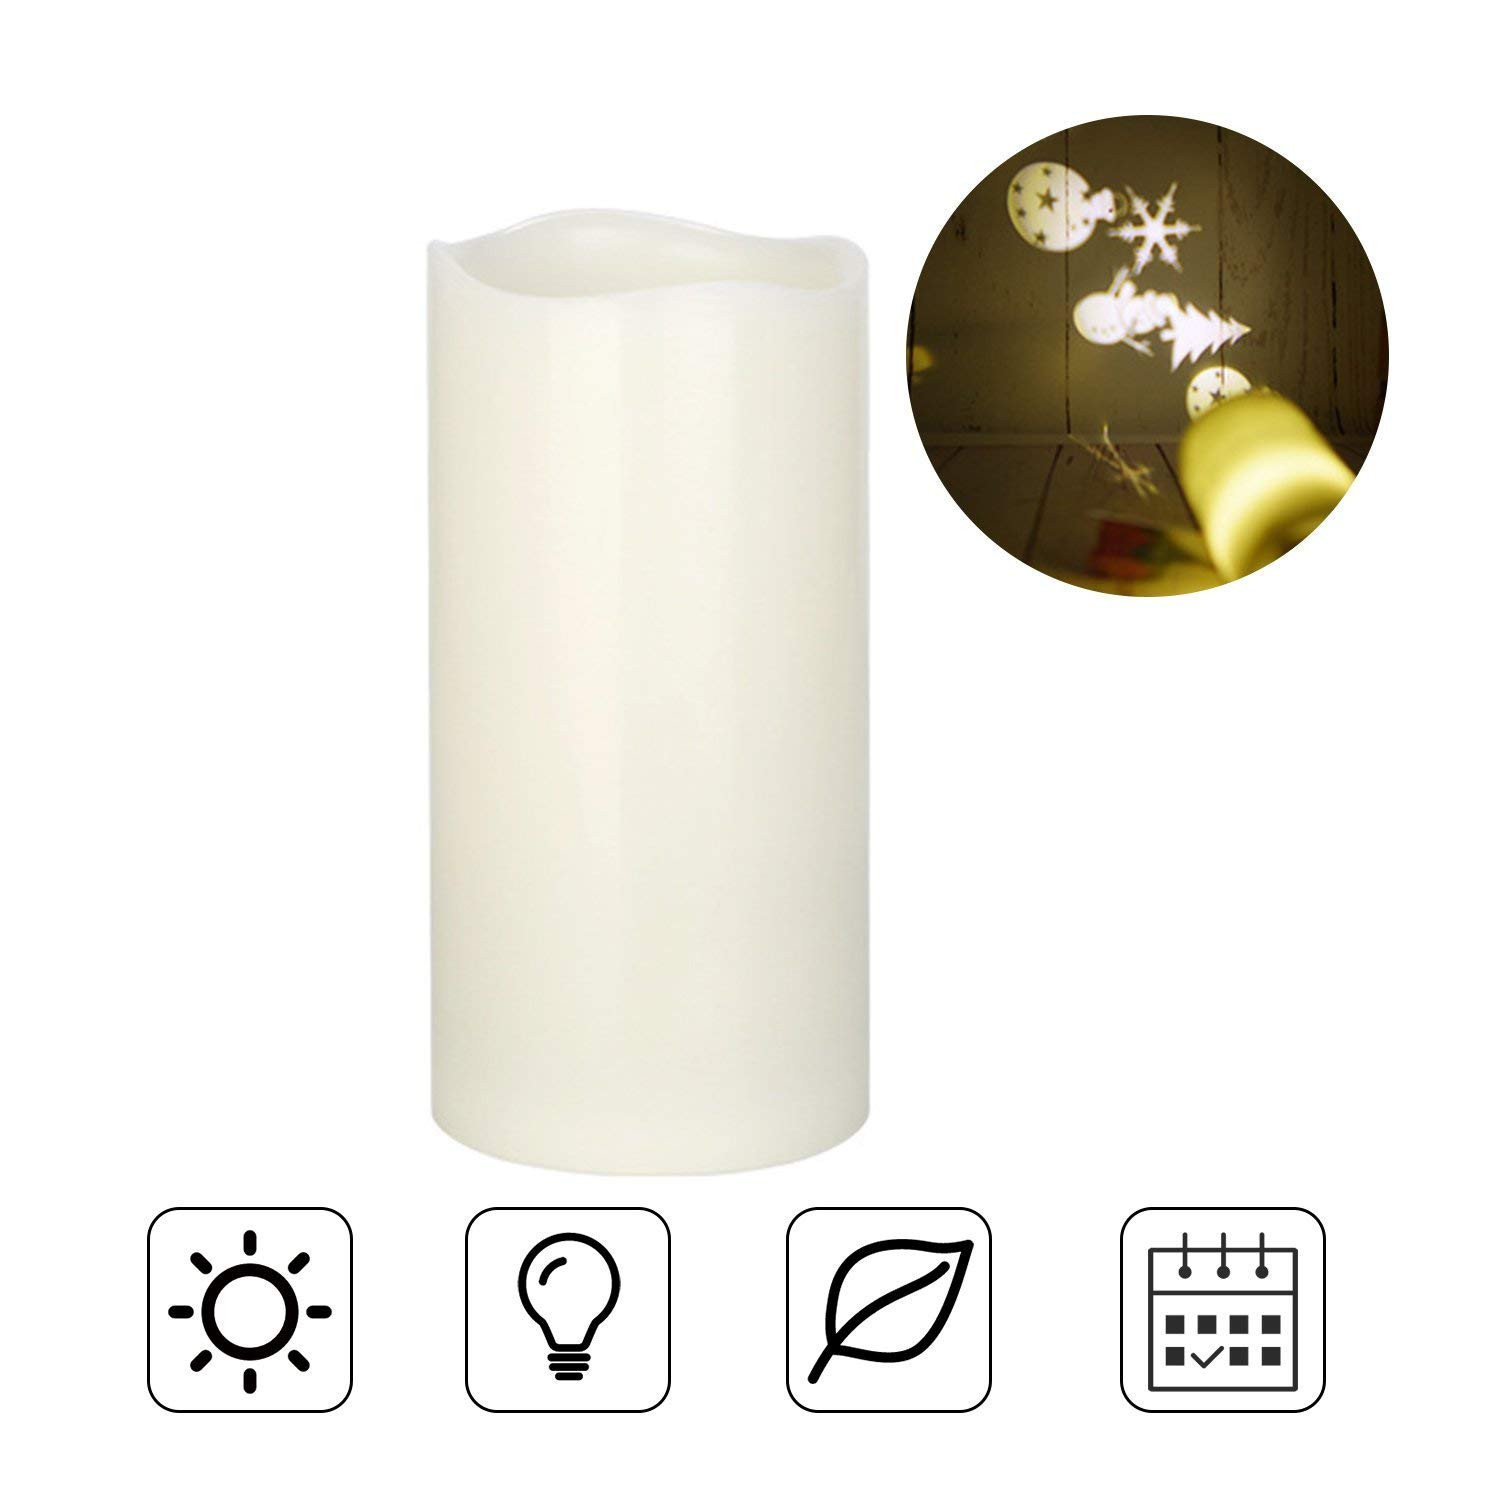 Battery-Powered-Christmas-Snowflake-LED-Candle-Light-Flameless-Projection-Flickering-Remote-Control-1349757-7